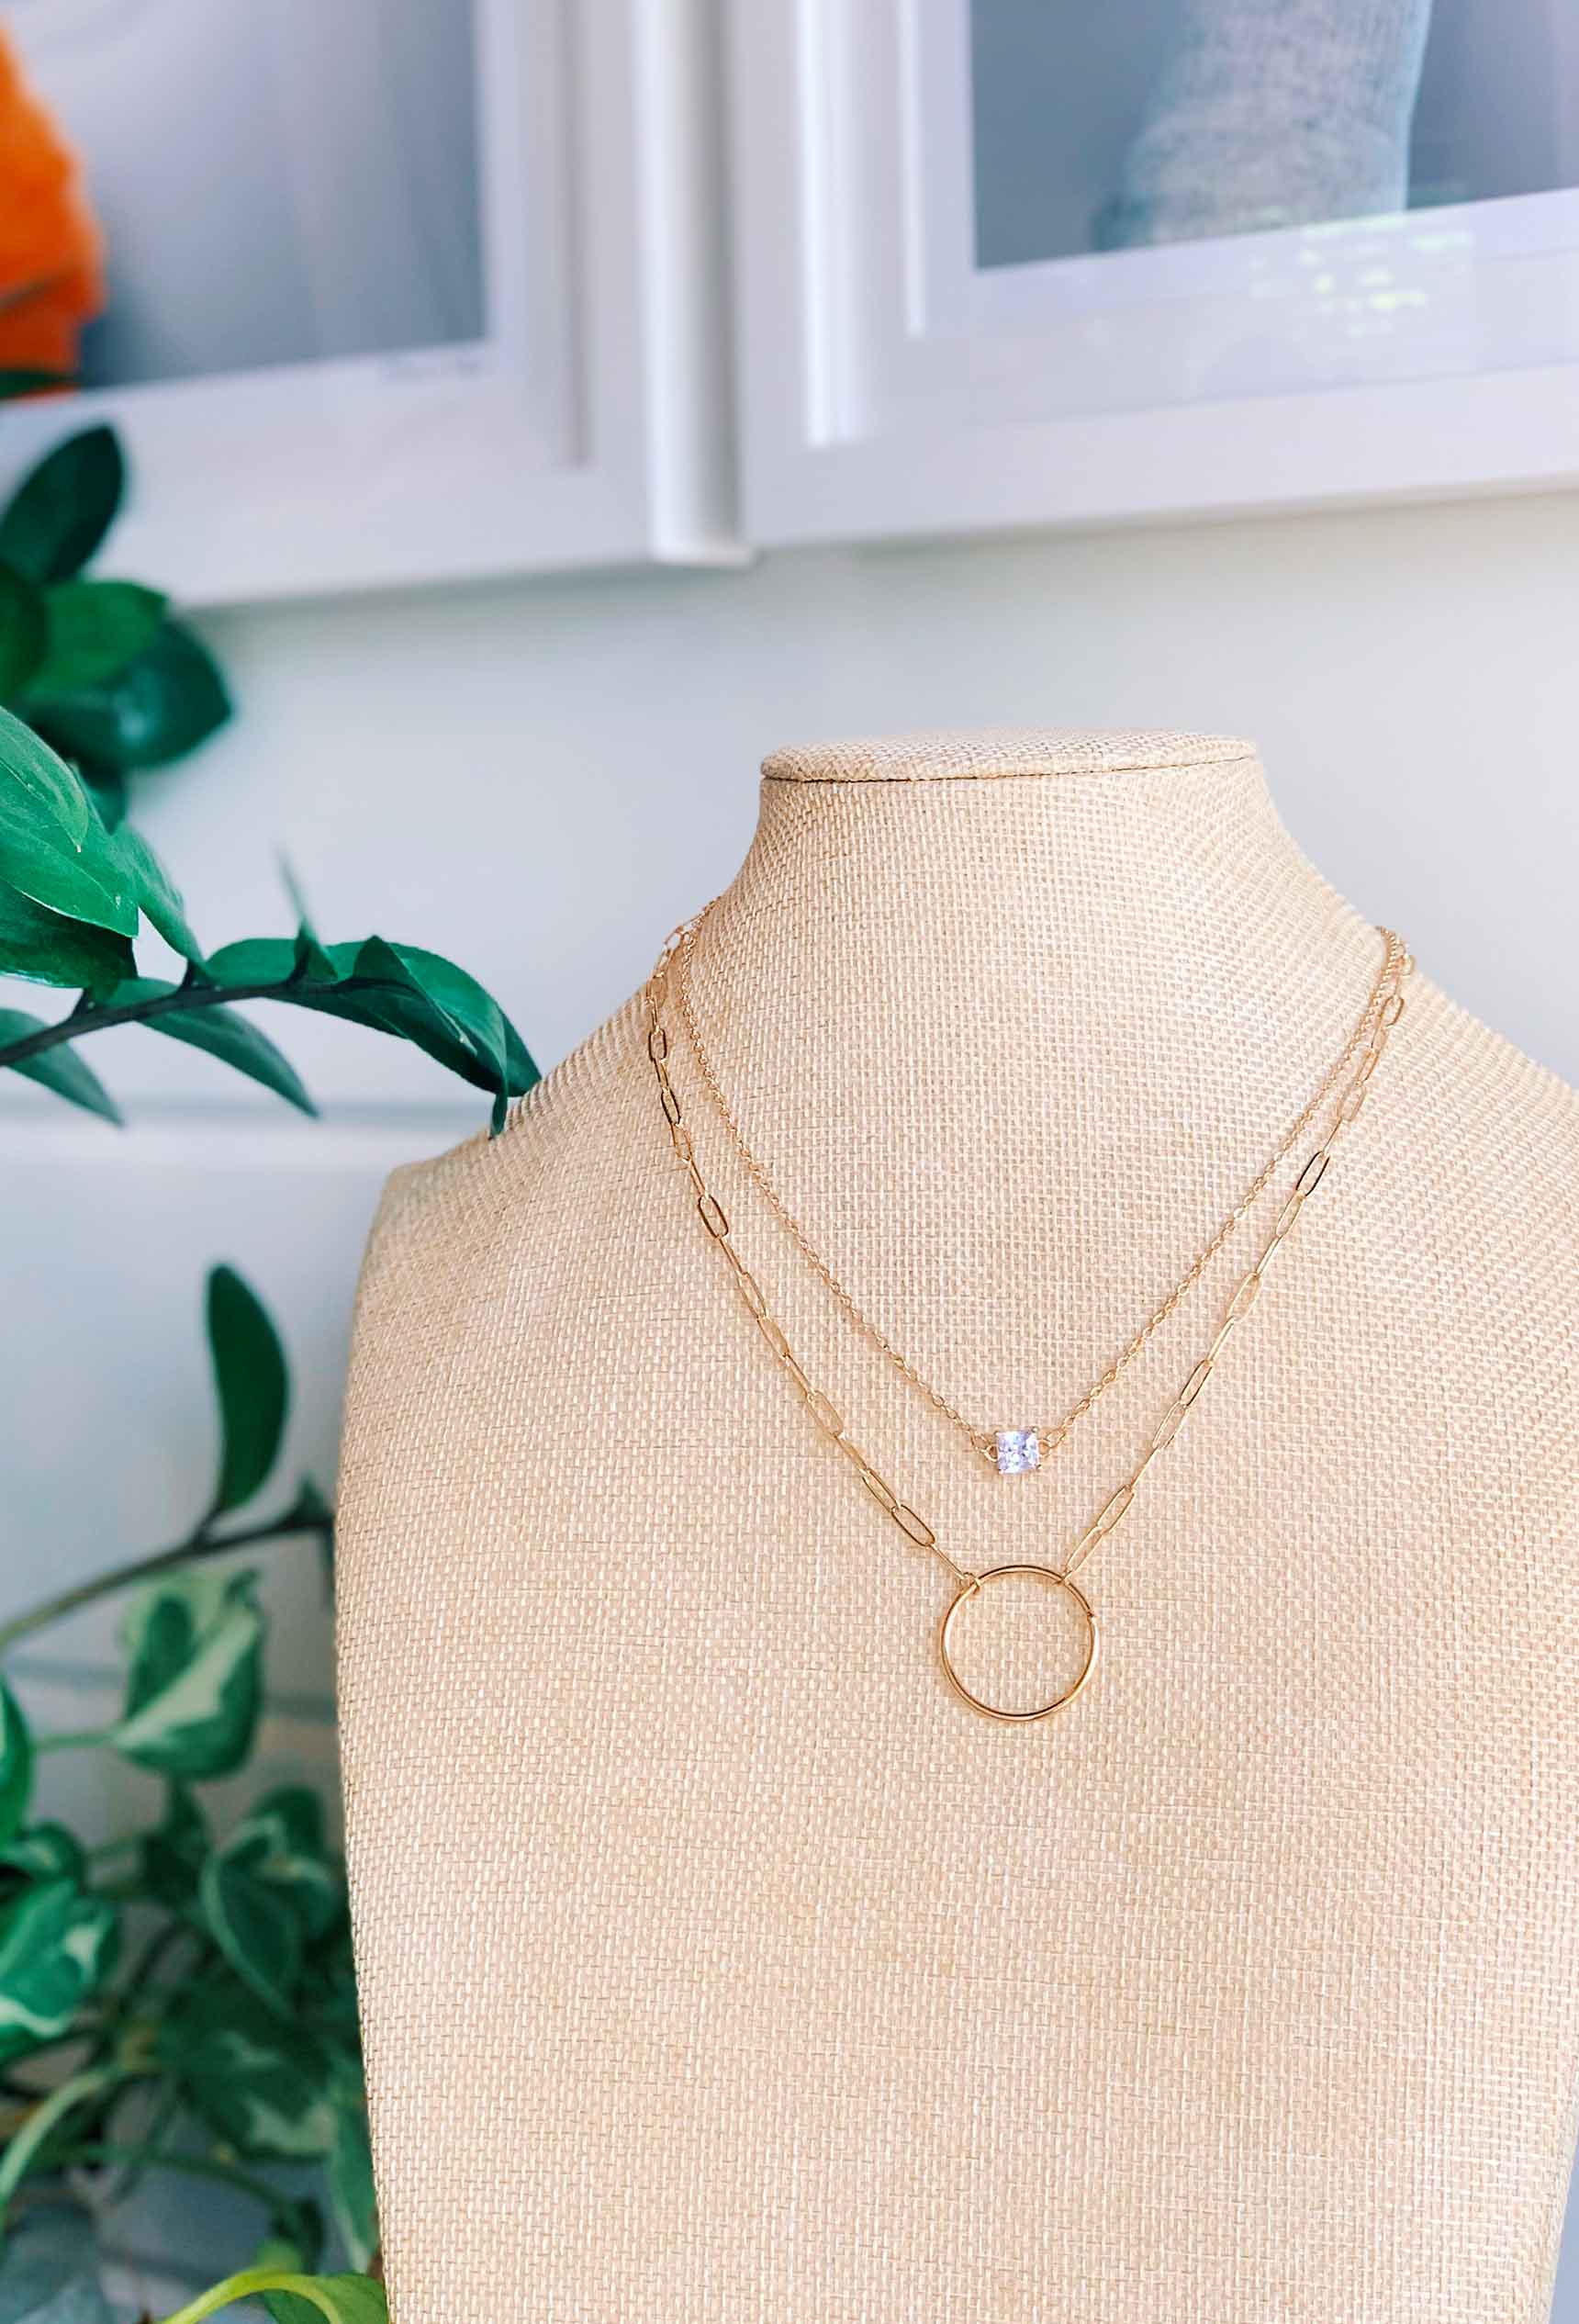 Layered Necklaces, Gold Layered Necklaces